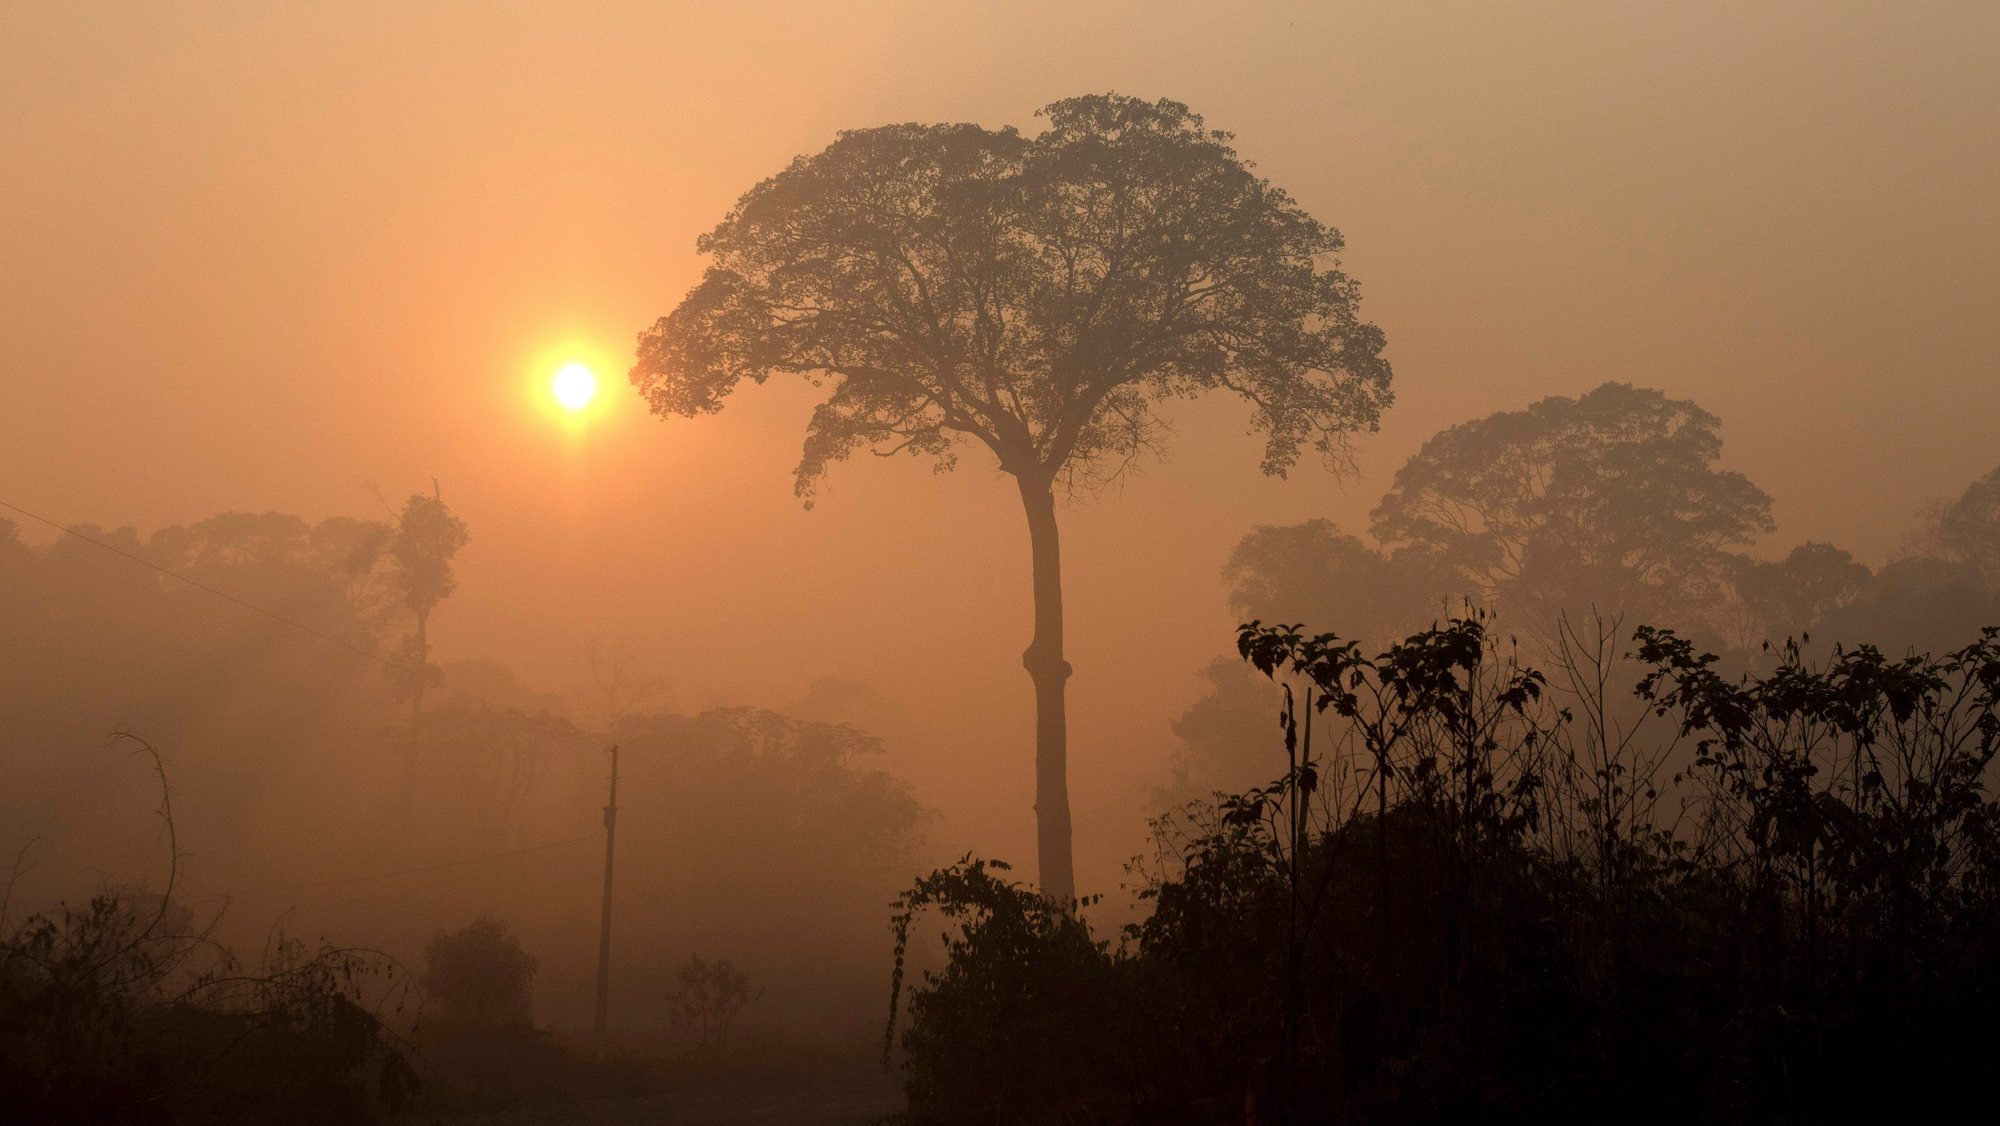 epa07802407 View of the smoke and dust left by the fires in the Amazon rainforest, near Porto Velho, Brazil, 29 August 2019. Brazilian Government, which is responsible for 70% of the 7 million square km of the Amazon region, issued on 29 August a decree that bans the use of fire for preparing sowing in the rainforest, hit recently by the worst fires registered in the last years. Furthermore, the Government informed that the fires have dropped down despite not providing data of the entire region.  EPA/Joedson Alves